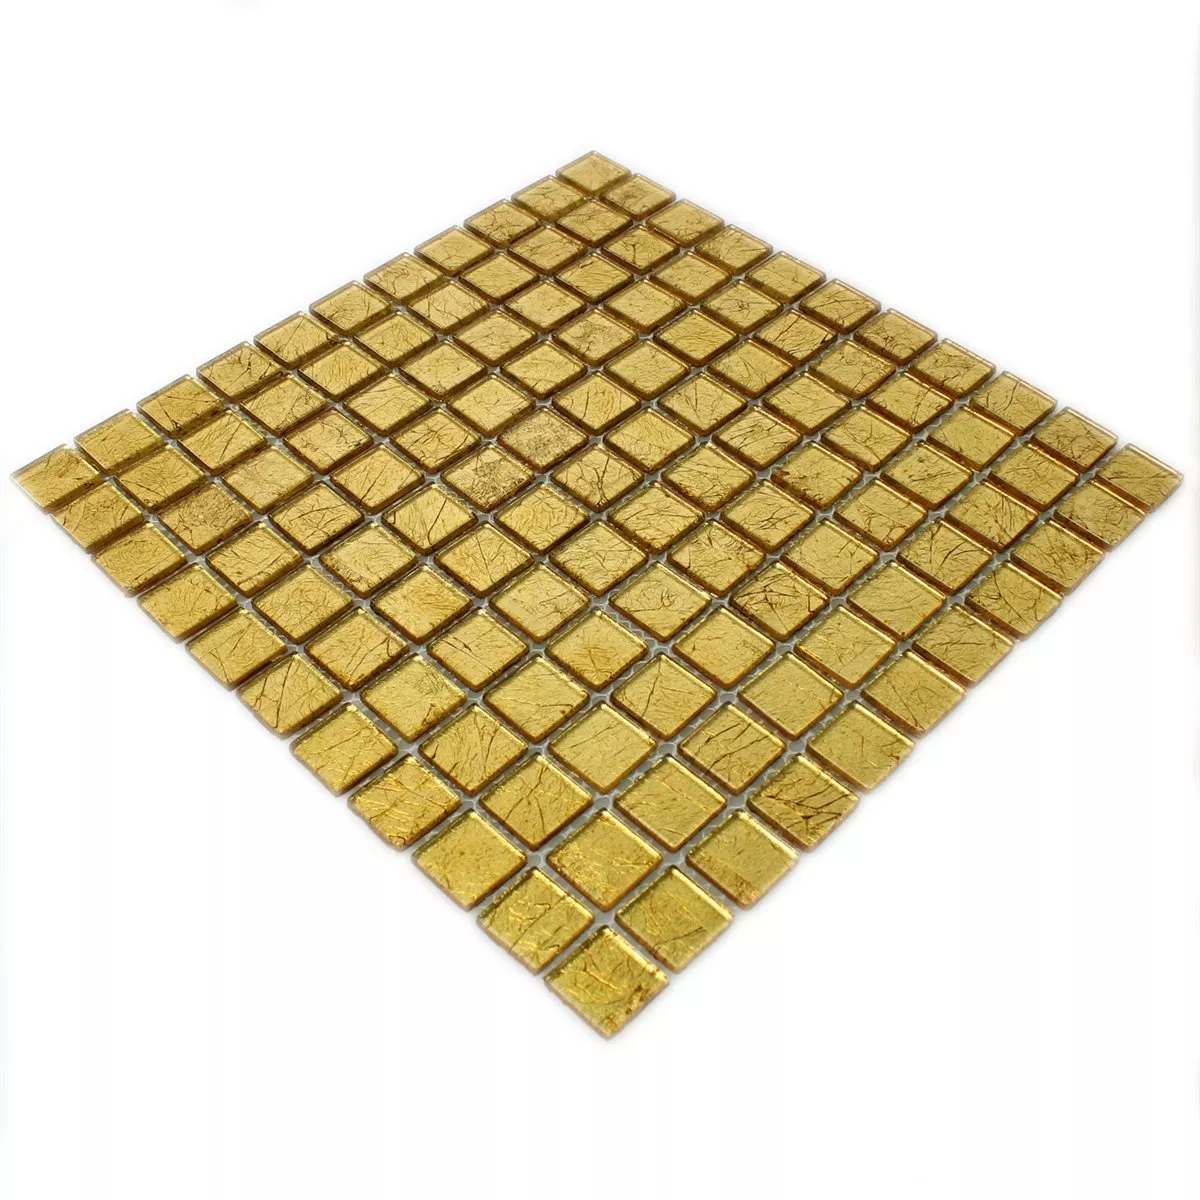 Mosaic Tiles Glass Gold Structured